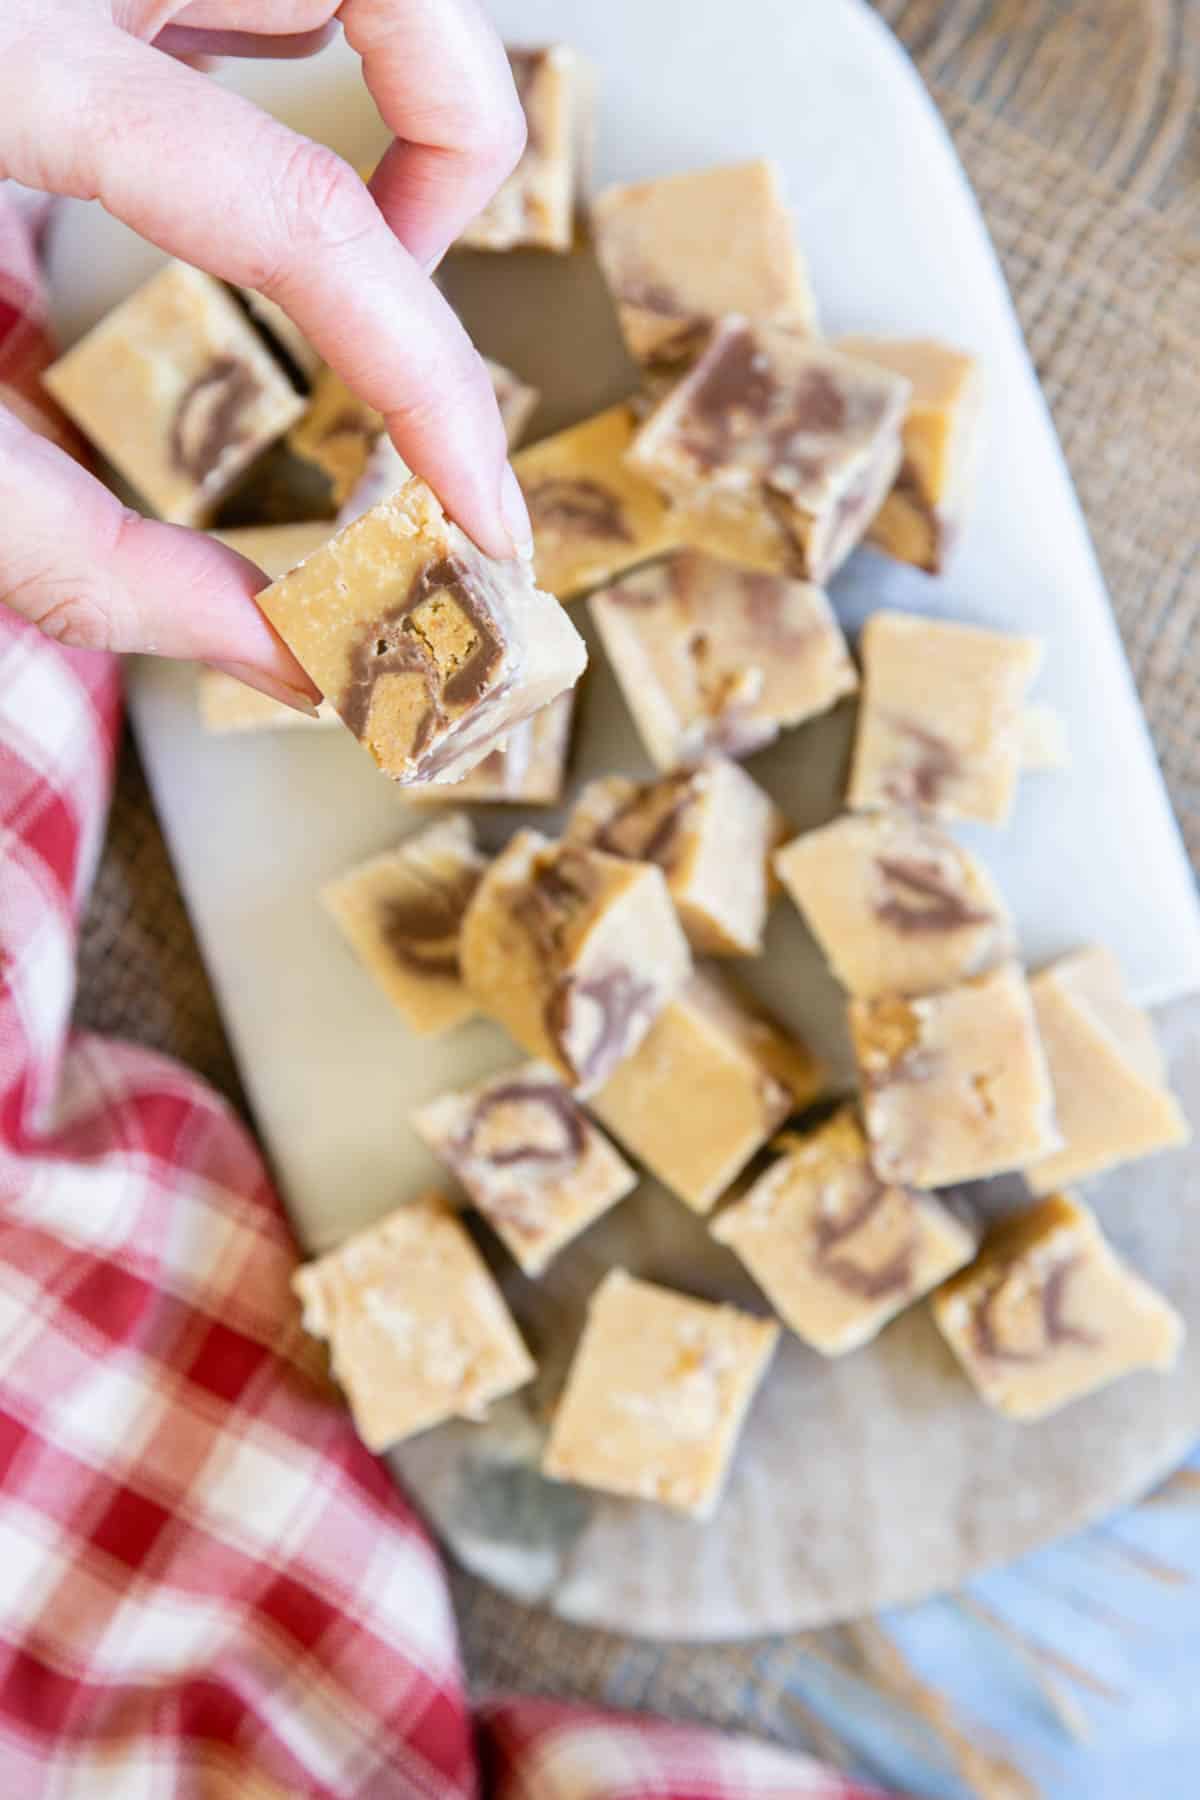 A hand lifting a piece of fudge from a platter.